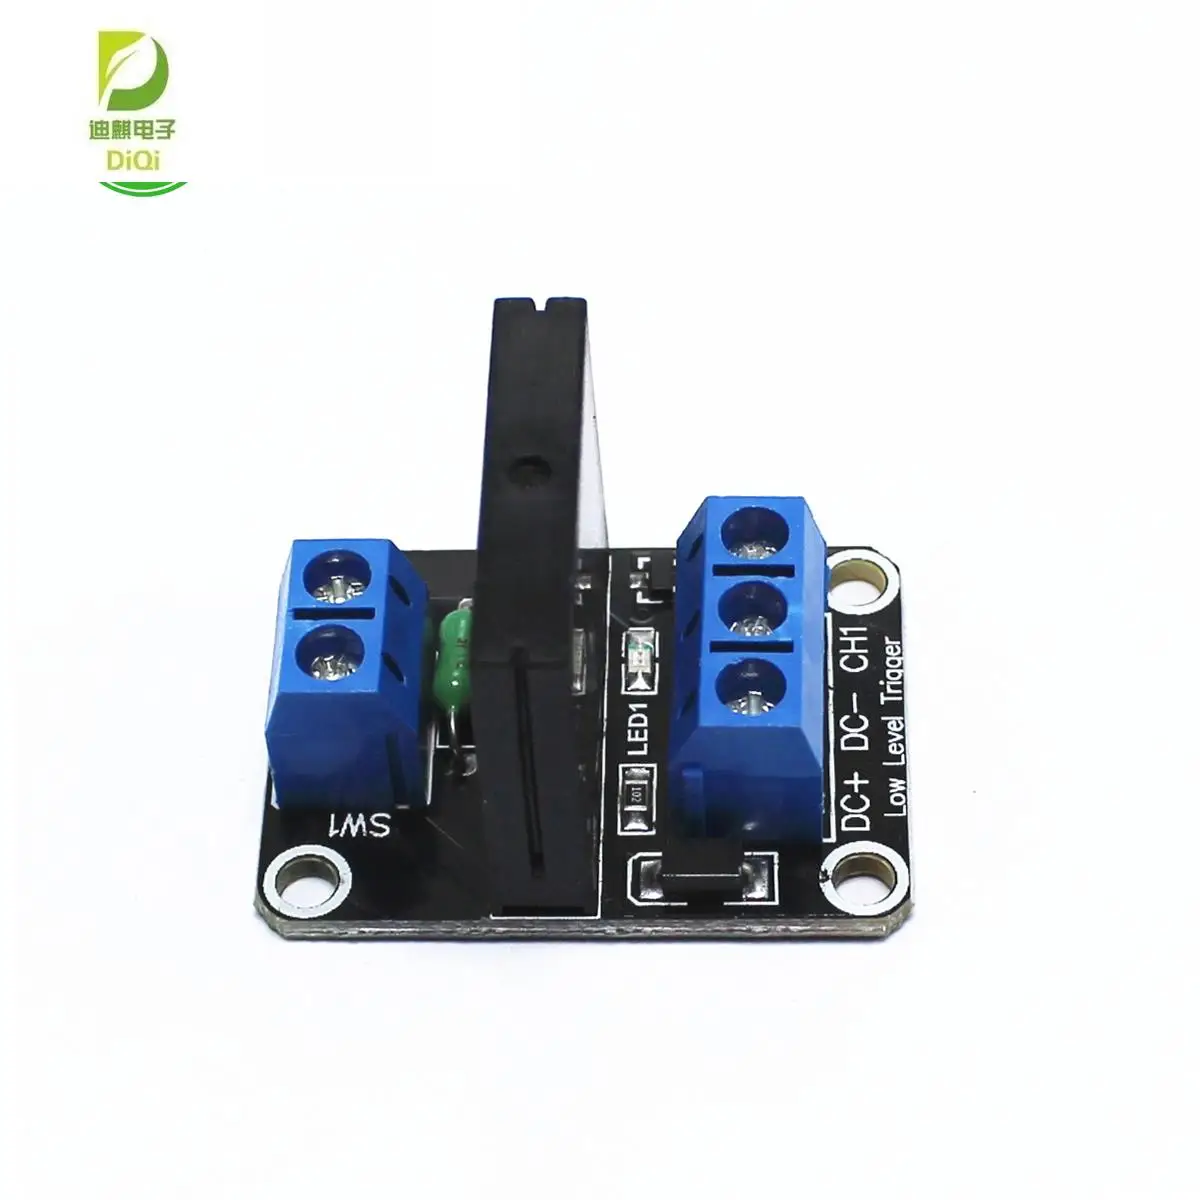 

10pcs 5V 1 Channel SSR G3MB-202P Solid State Relay Module 240V 2A Output with Resistive Fuse